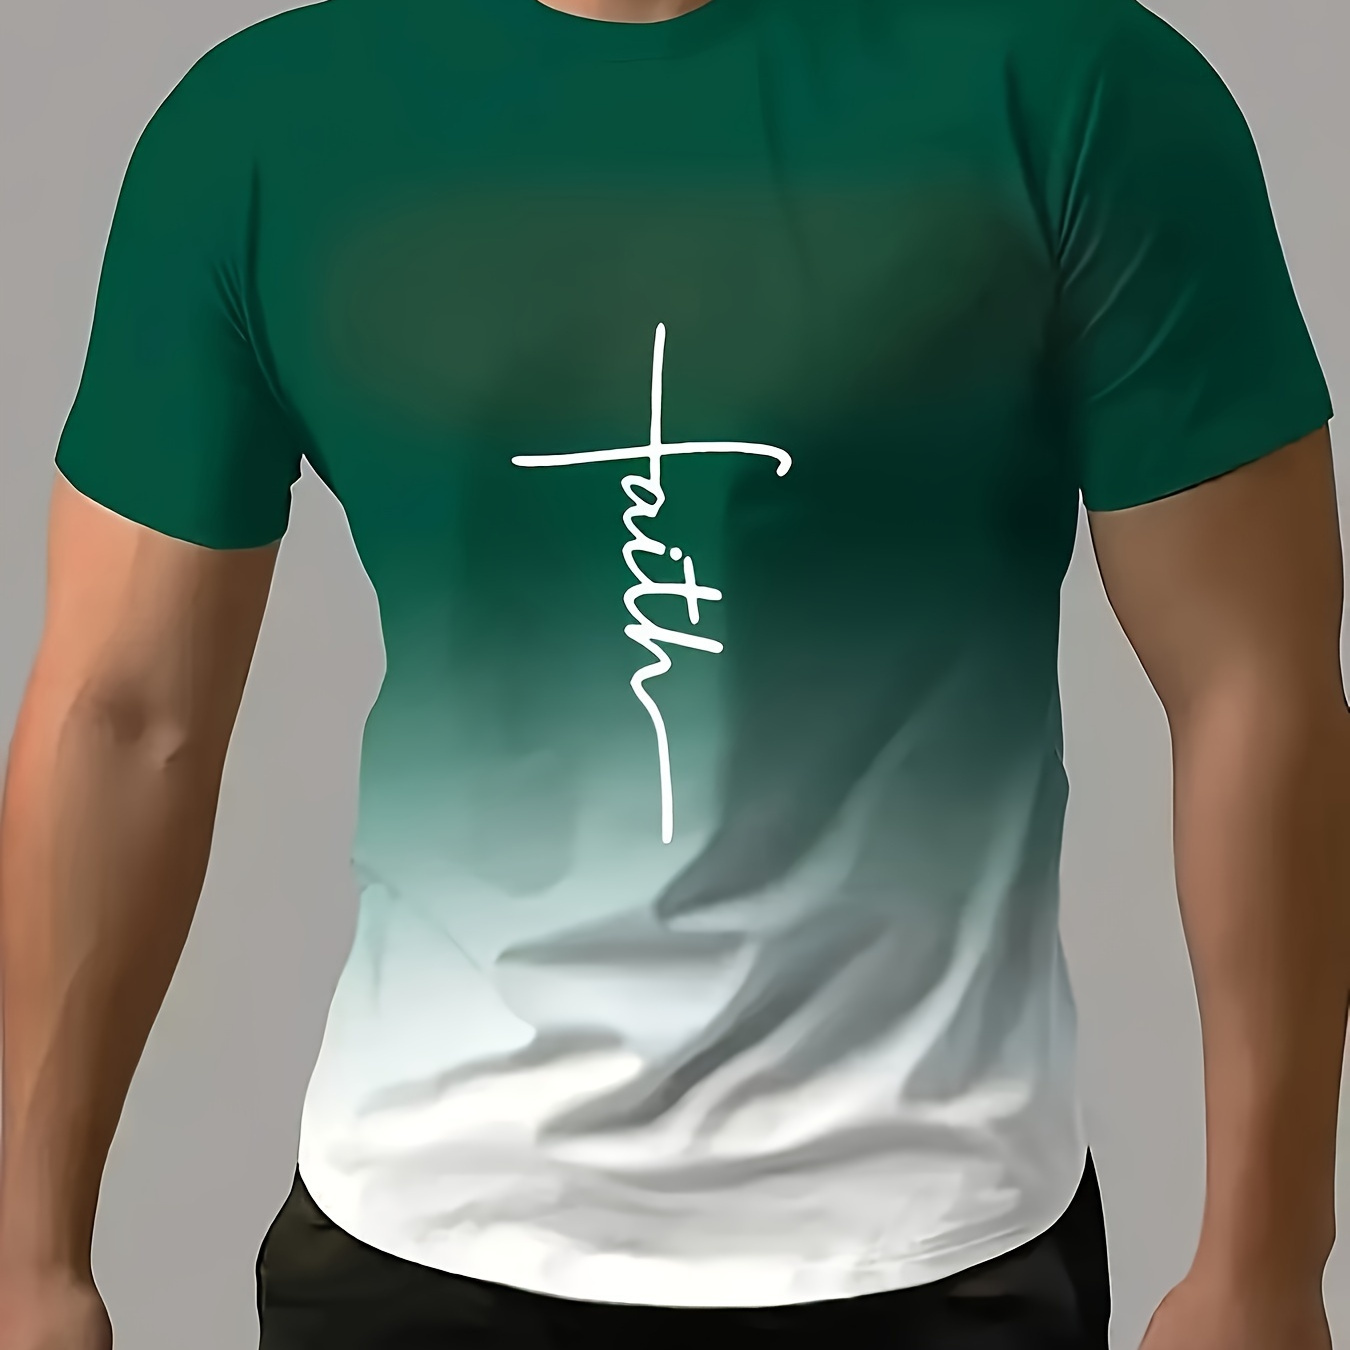 

faith" Print Gradient T-shirt For Men, Crew Neck Tee, Casual Short Sleeve Top, Men's Clothing For Summer Daily Wear